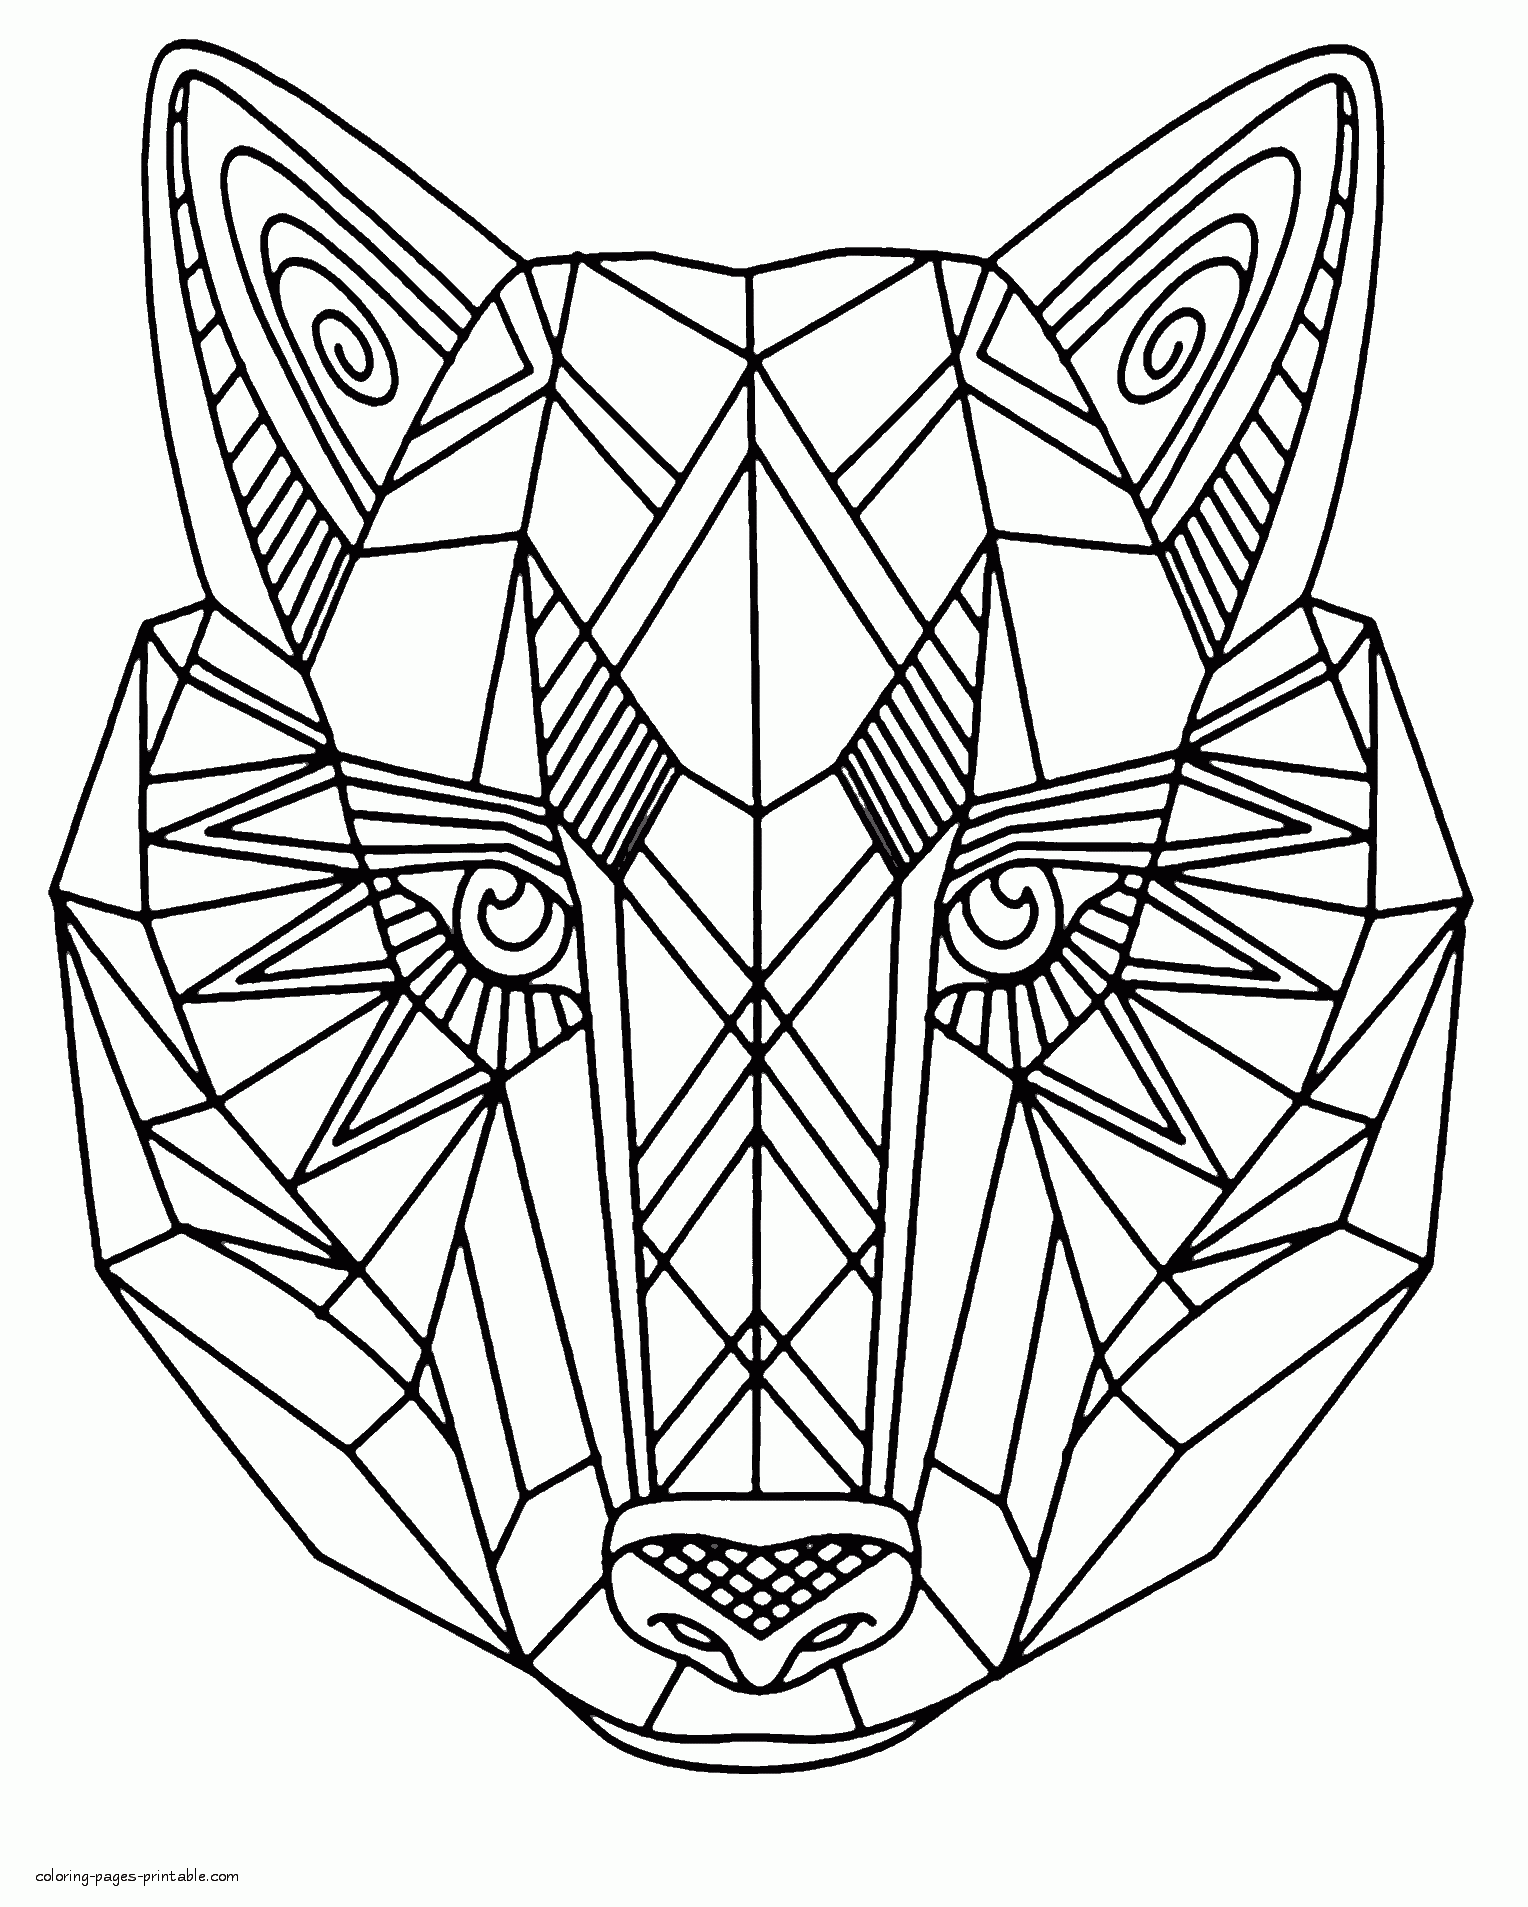 Zentangle Animal Face Coloring For Adults    COLORING PAGES ...